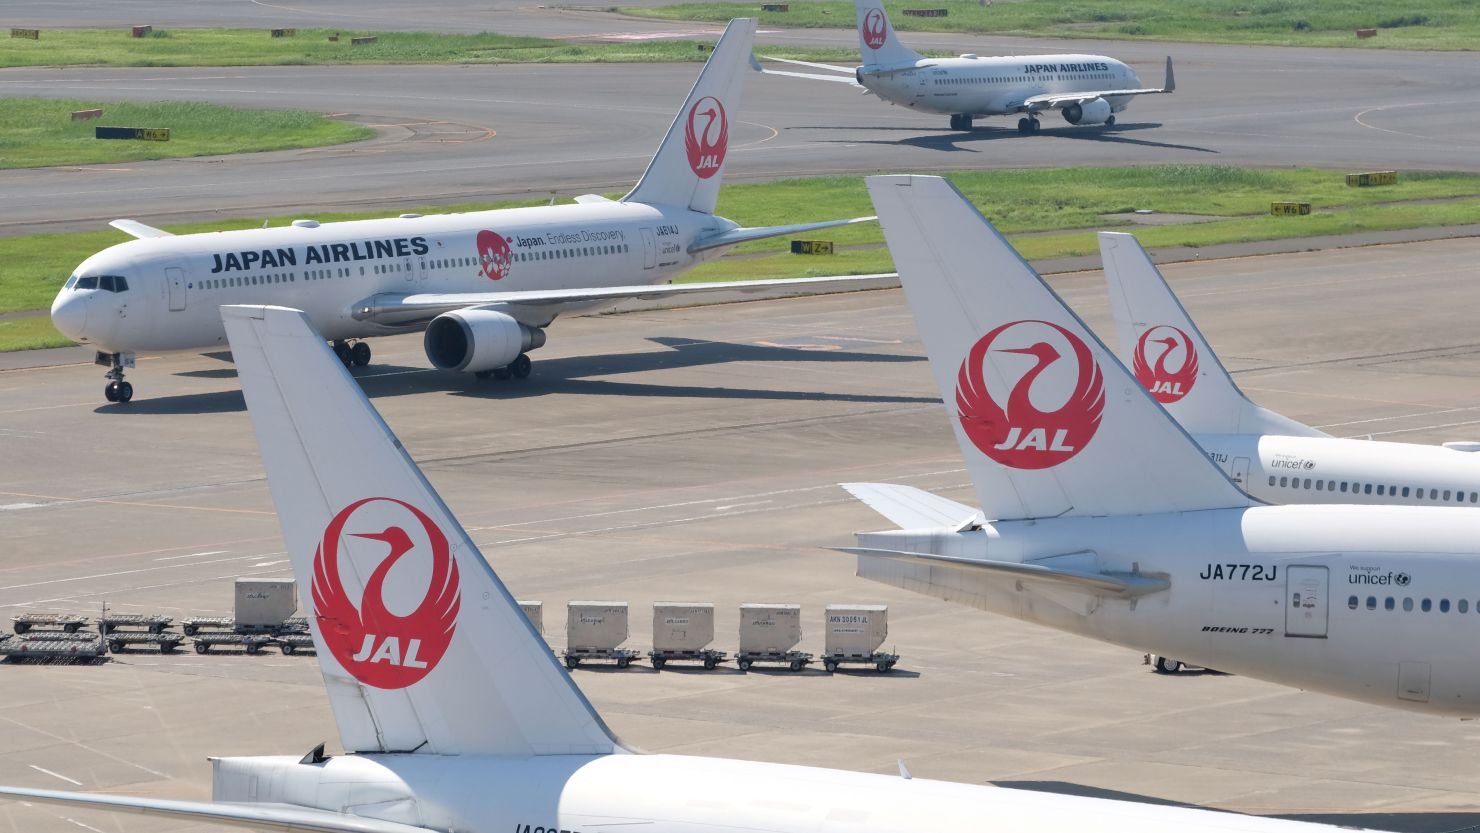 A Japan Airlines pilot was arrested in London after failing a breathalyzer test in October.